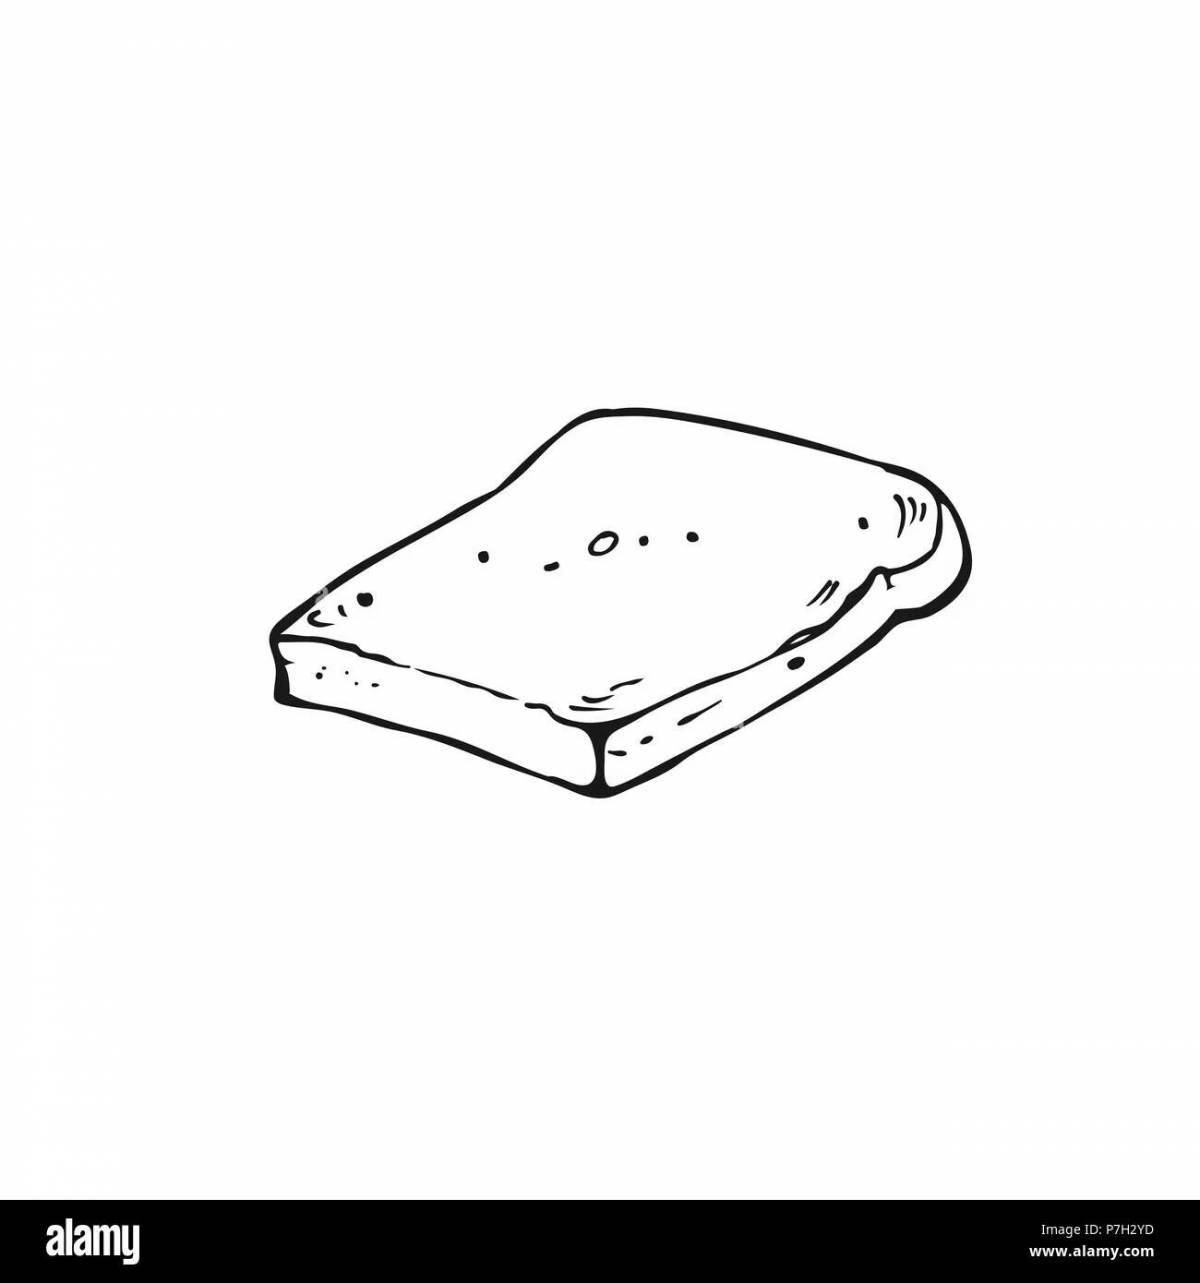 Coloring a toasted slice of bread